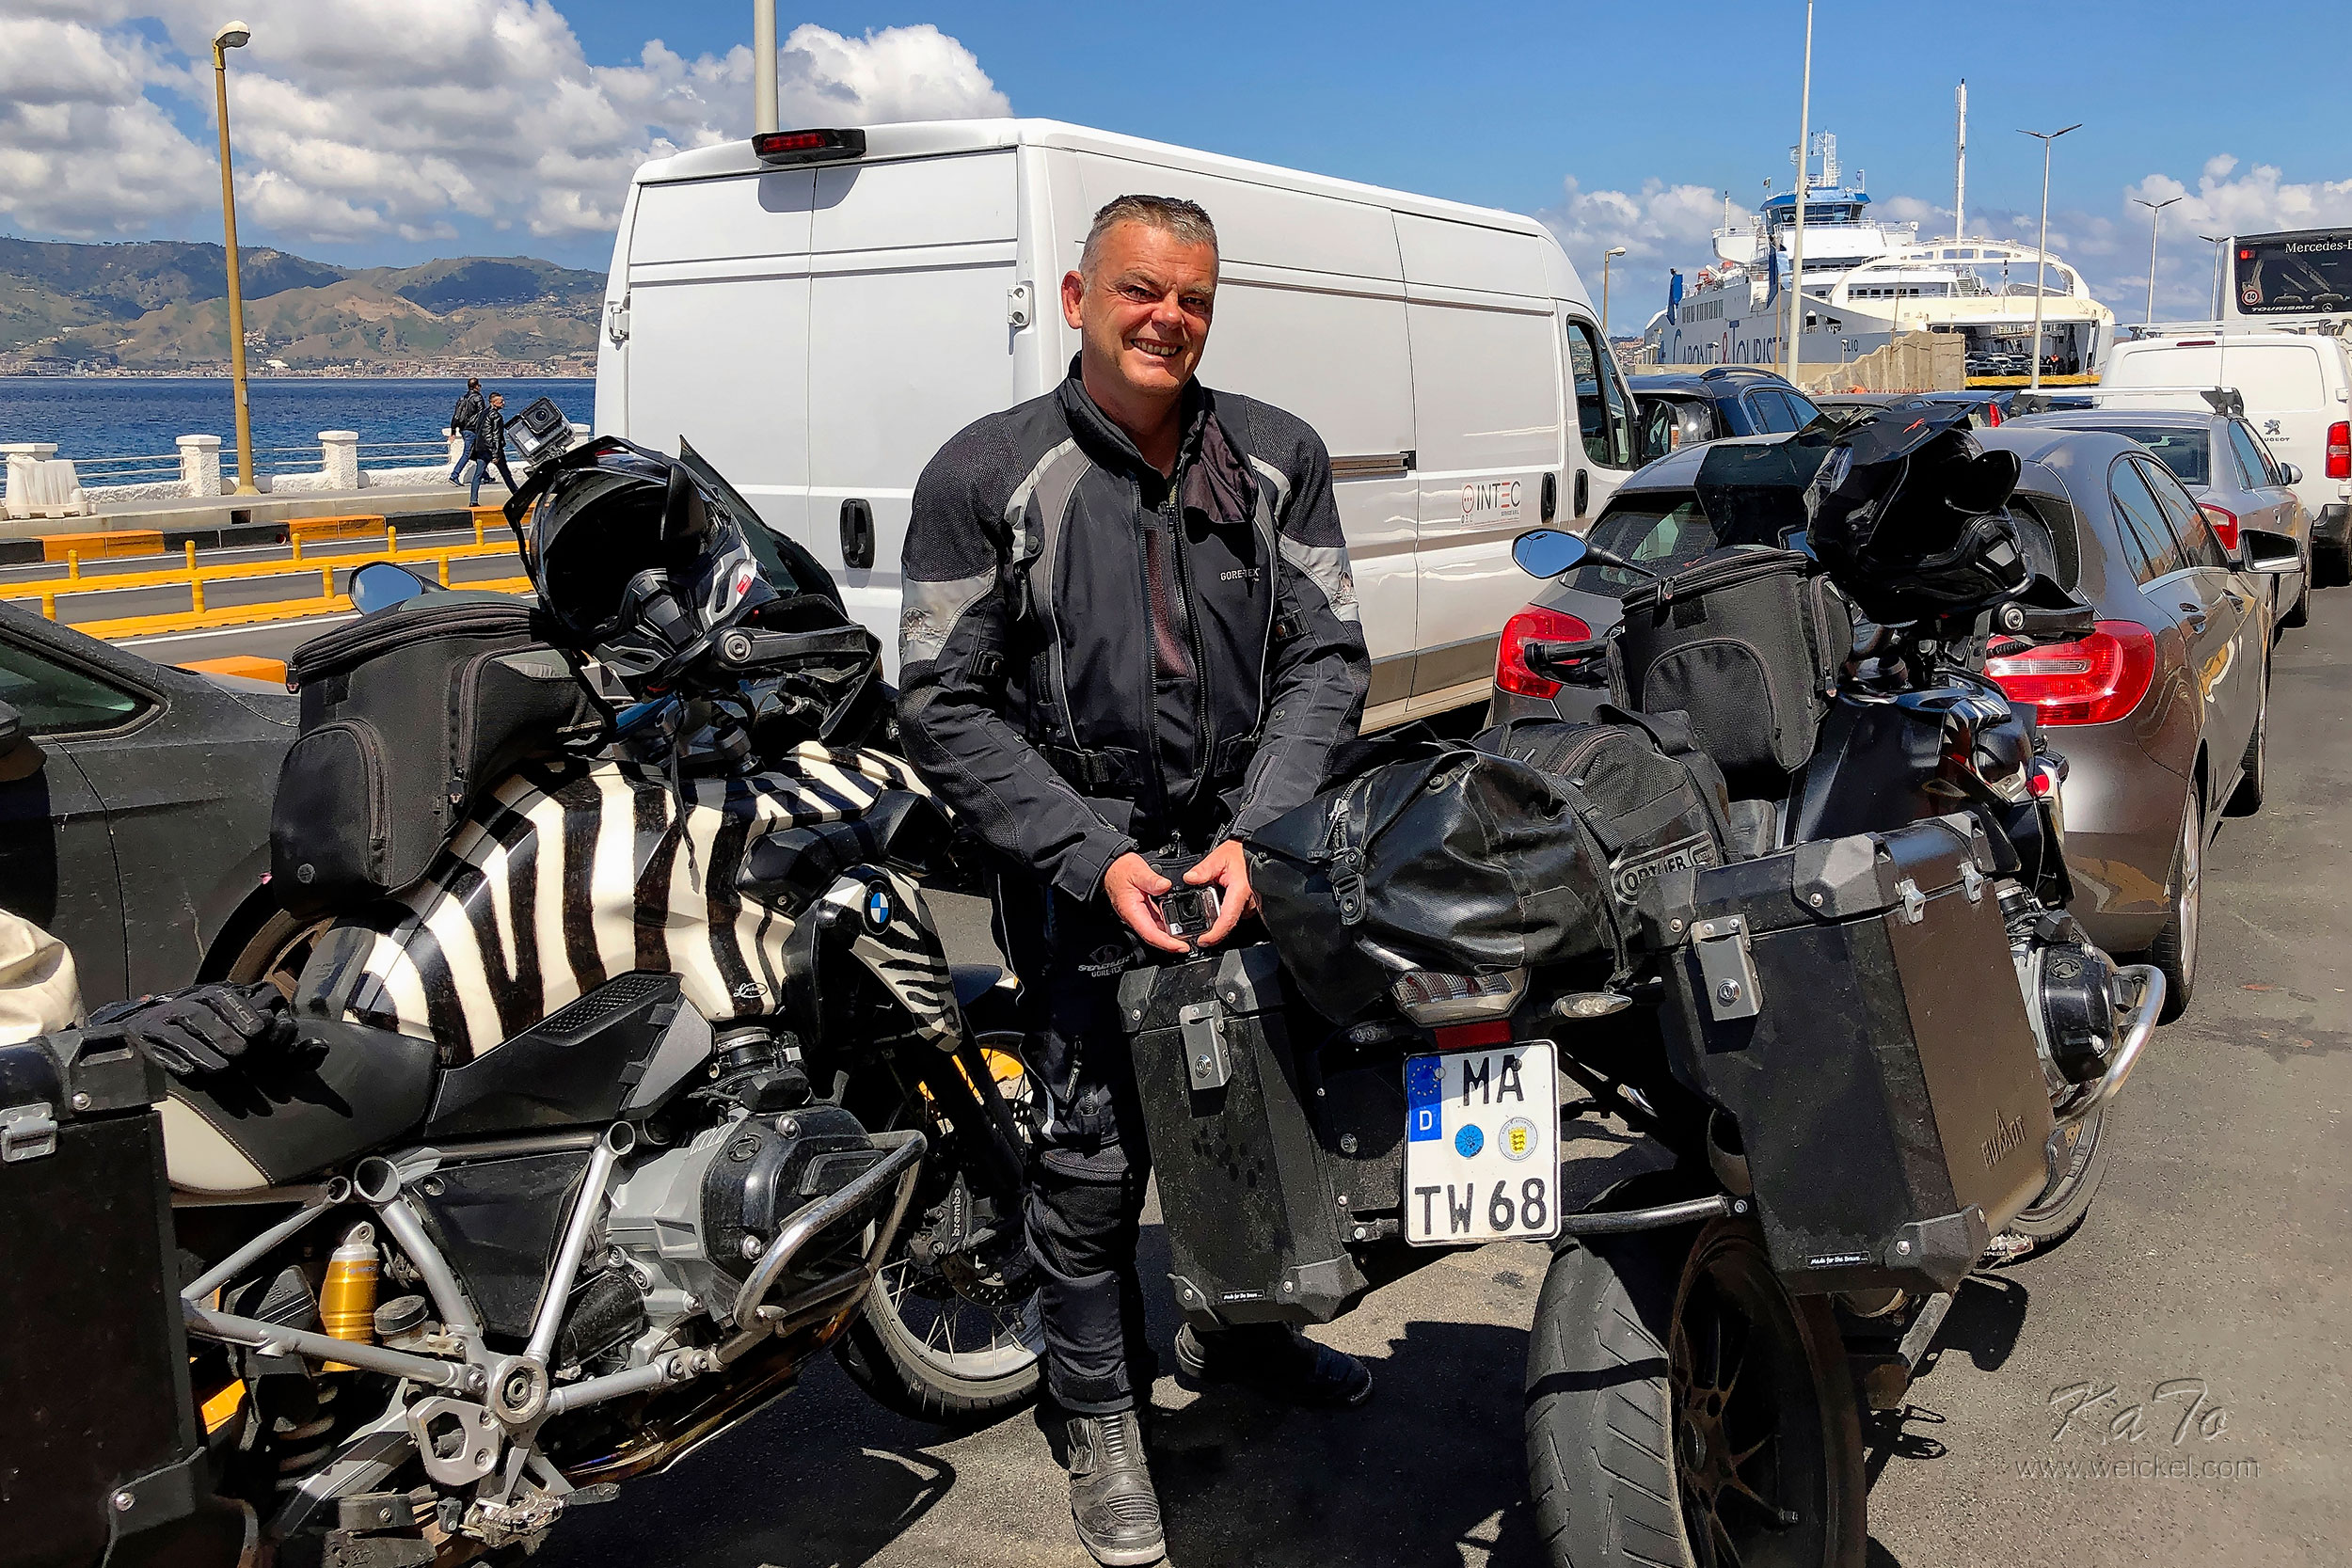 Waiting for the ferry from Calabria to Sicily